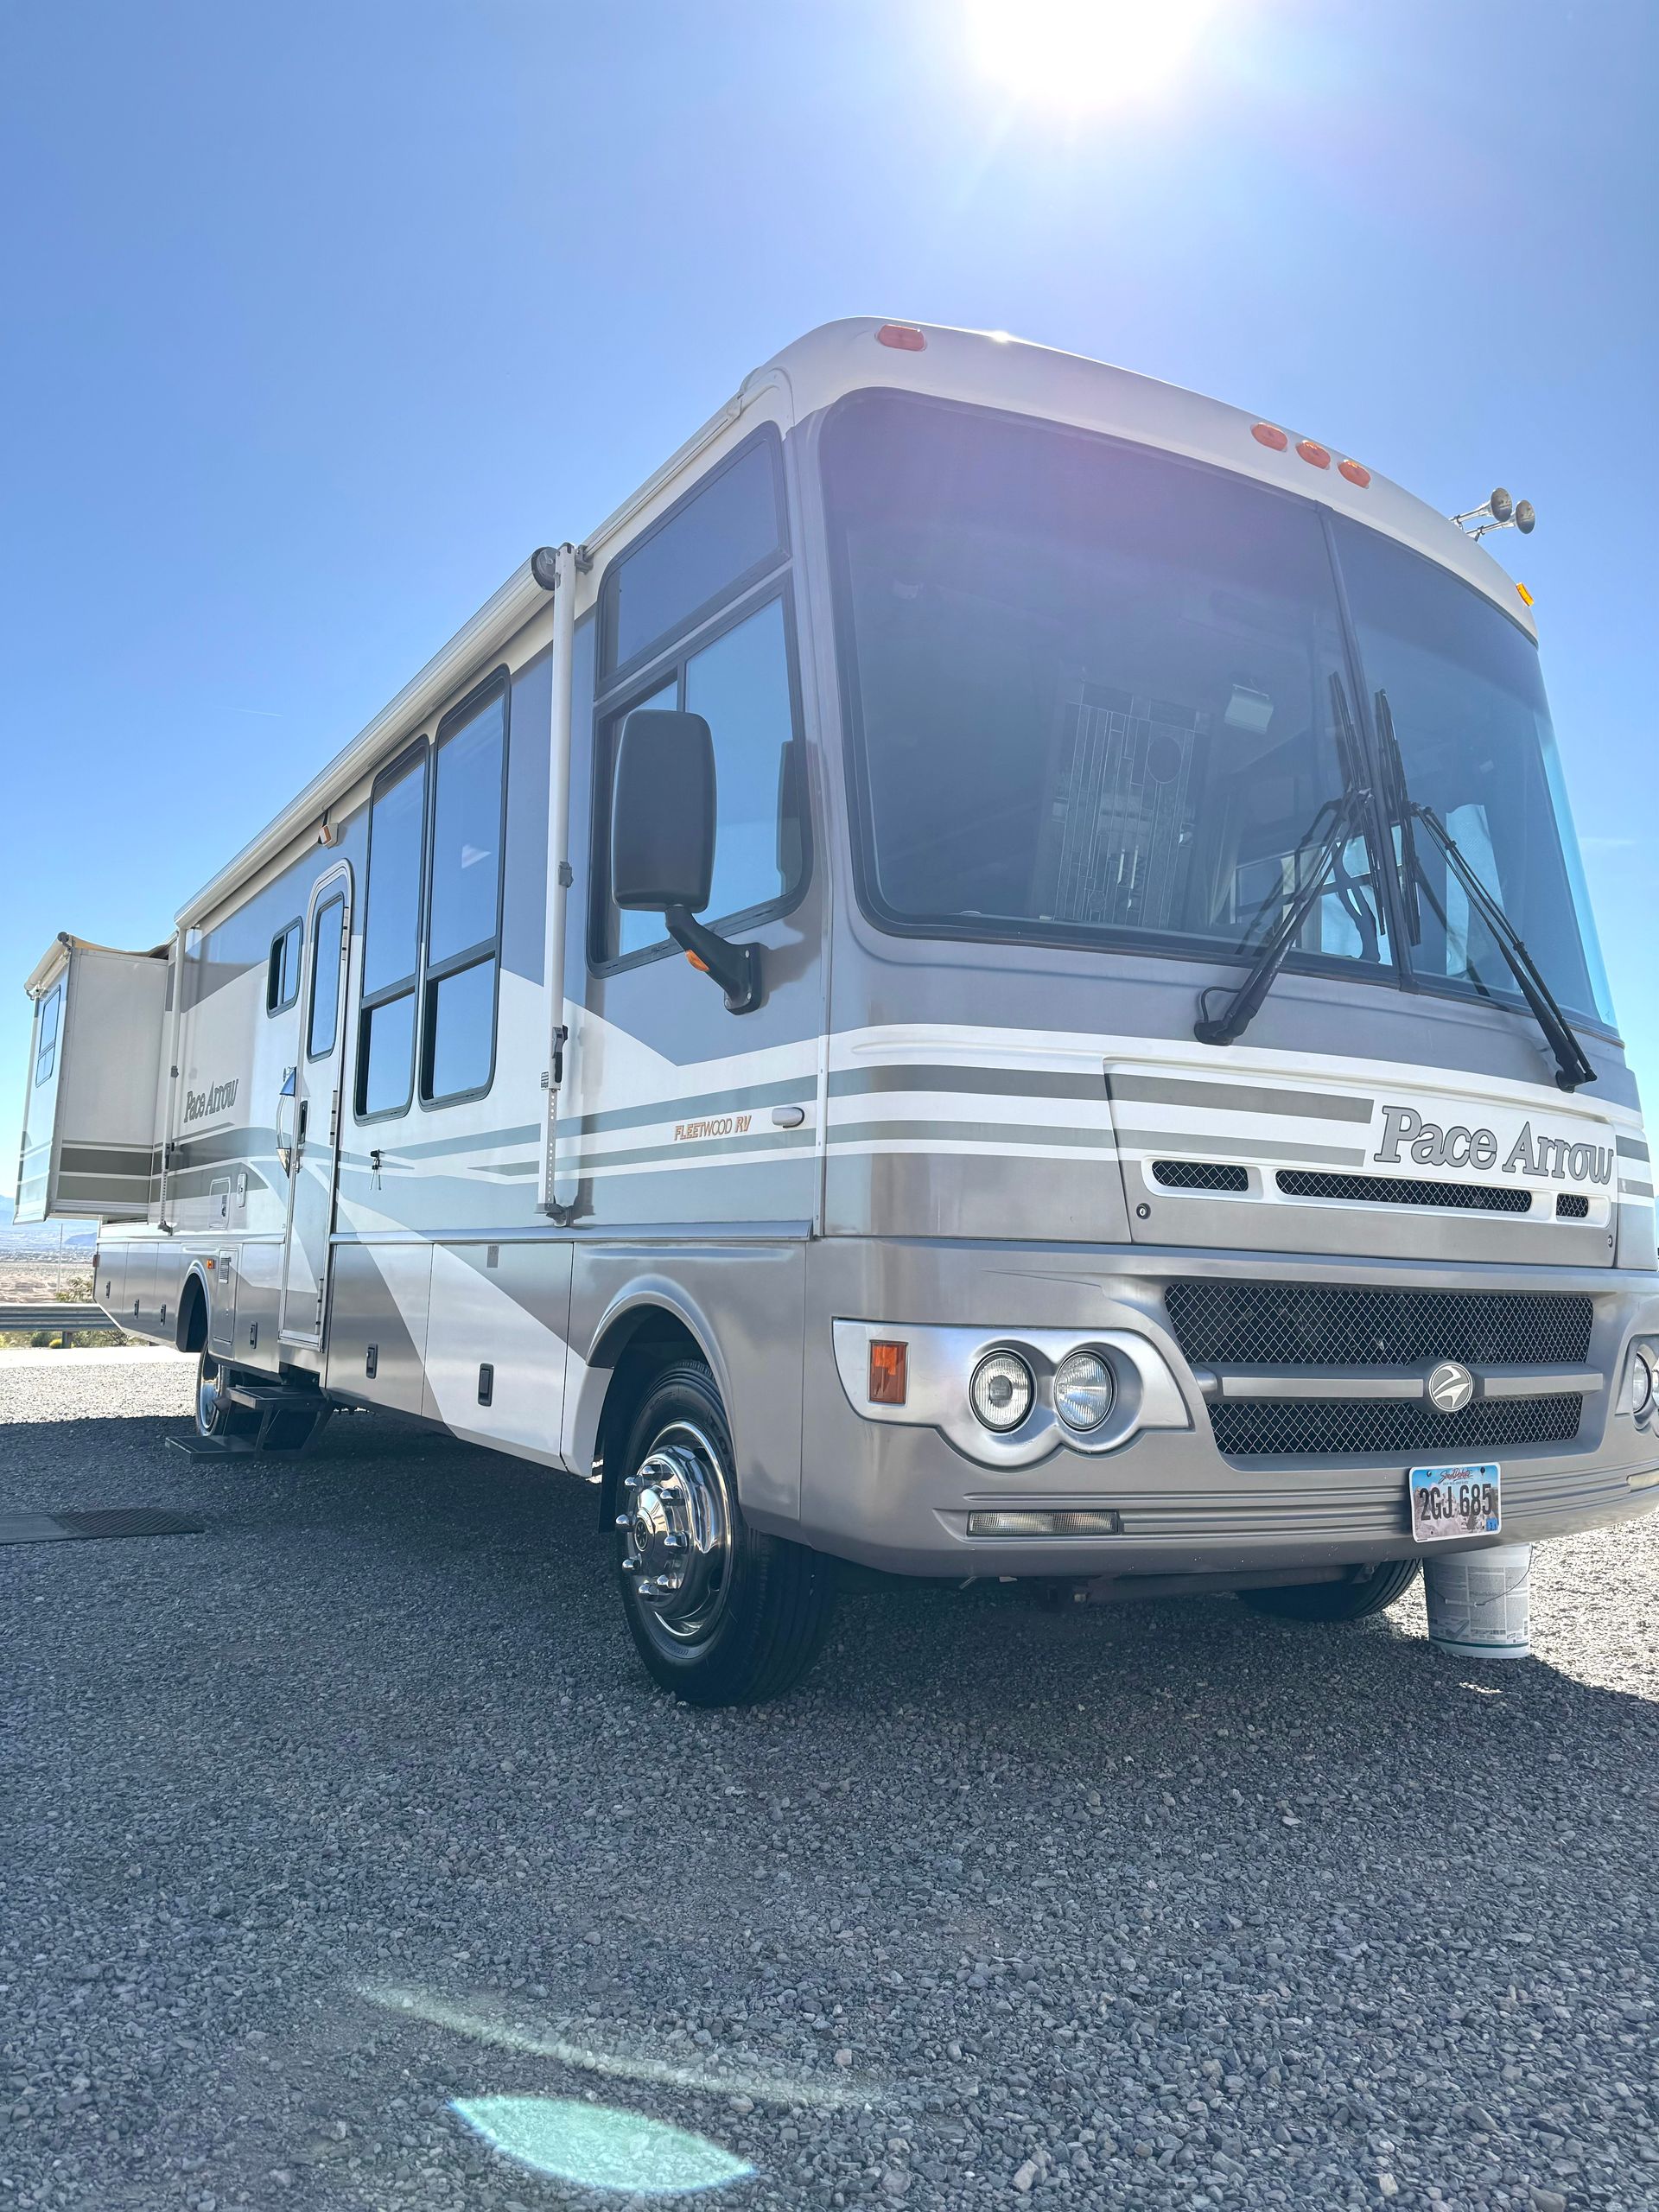 A large rv is parked in a gravel lot.